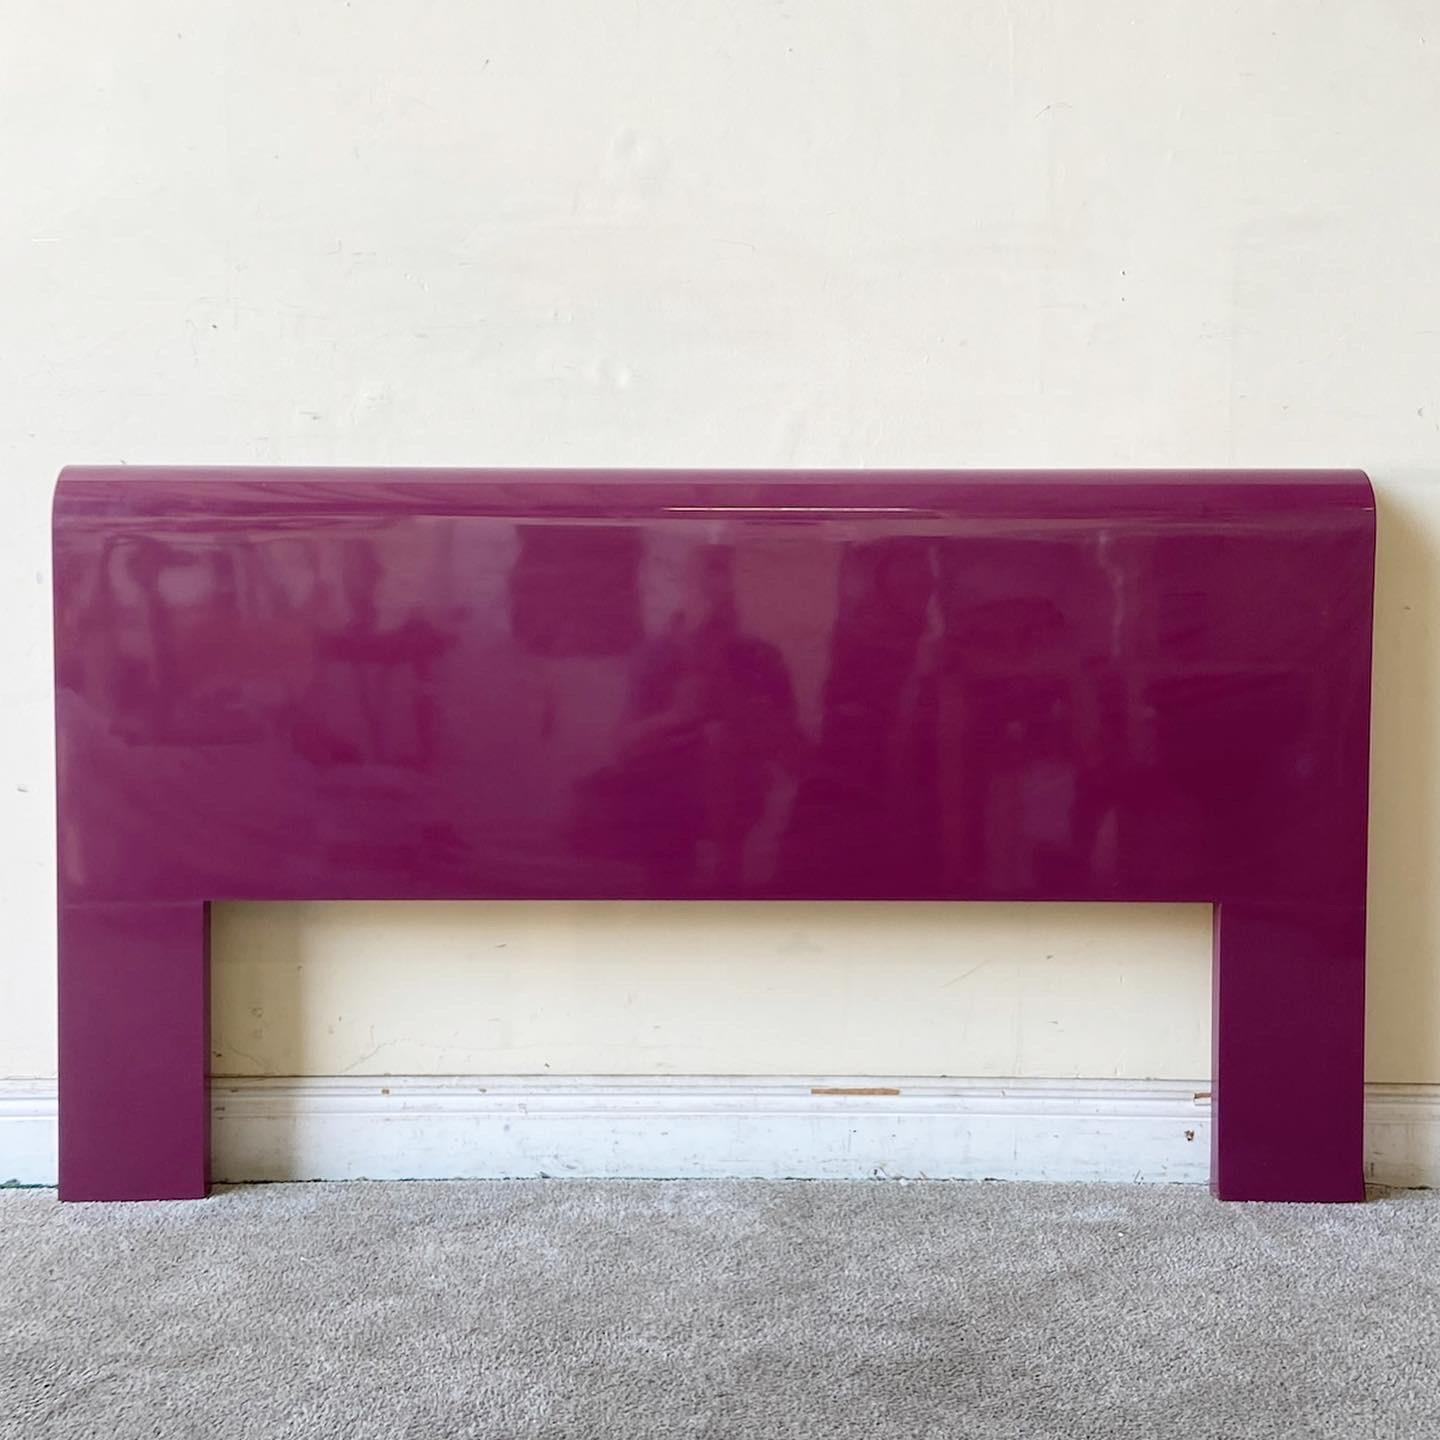 Incredible postmodern queen size waterfall headboard. Features a purple lacquer laminate.
 